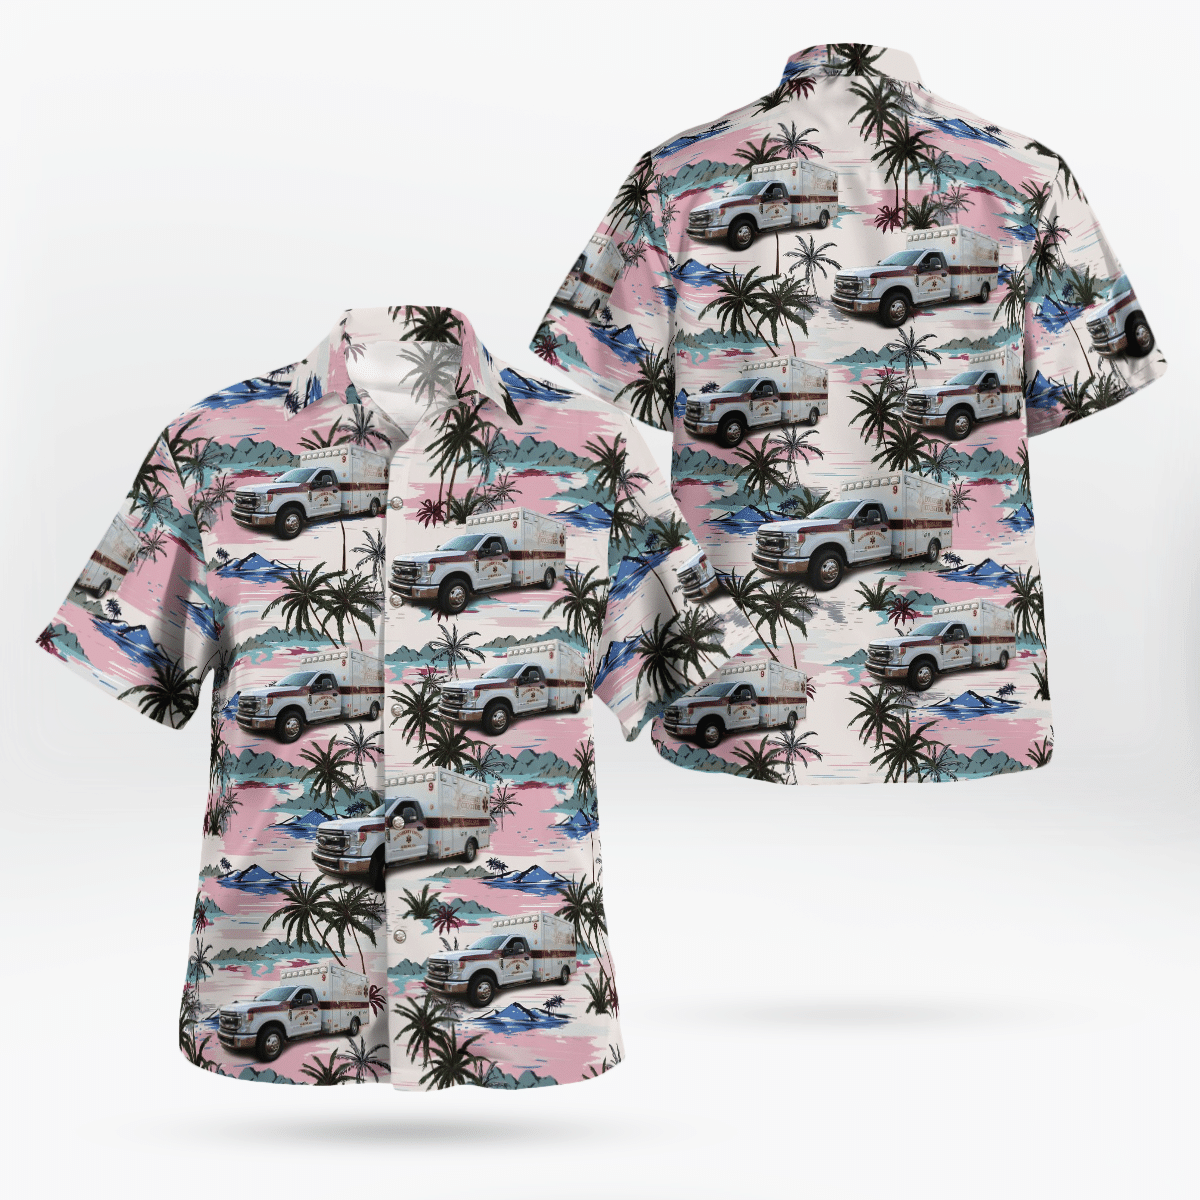 If you are in need of a new summertime look, pick up this Hawaiian shirt 19